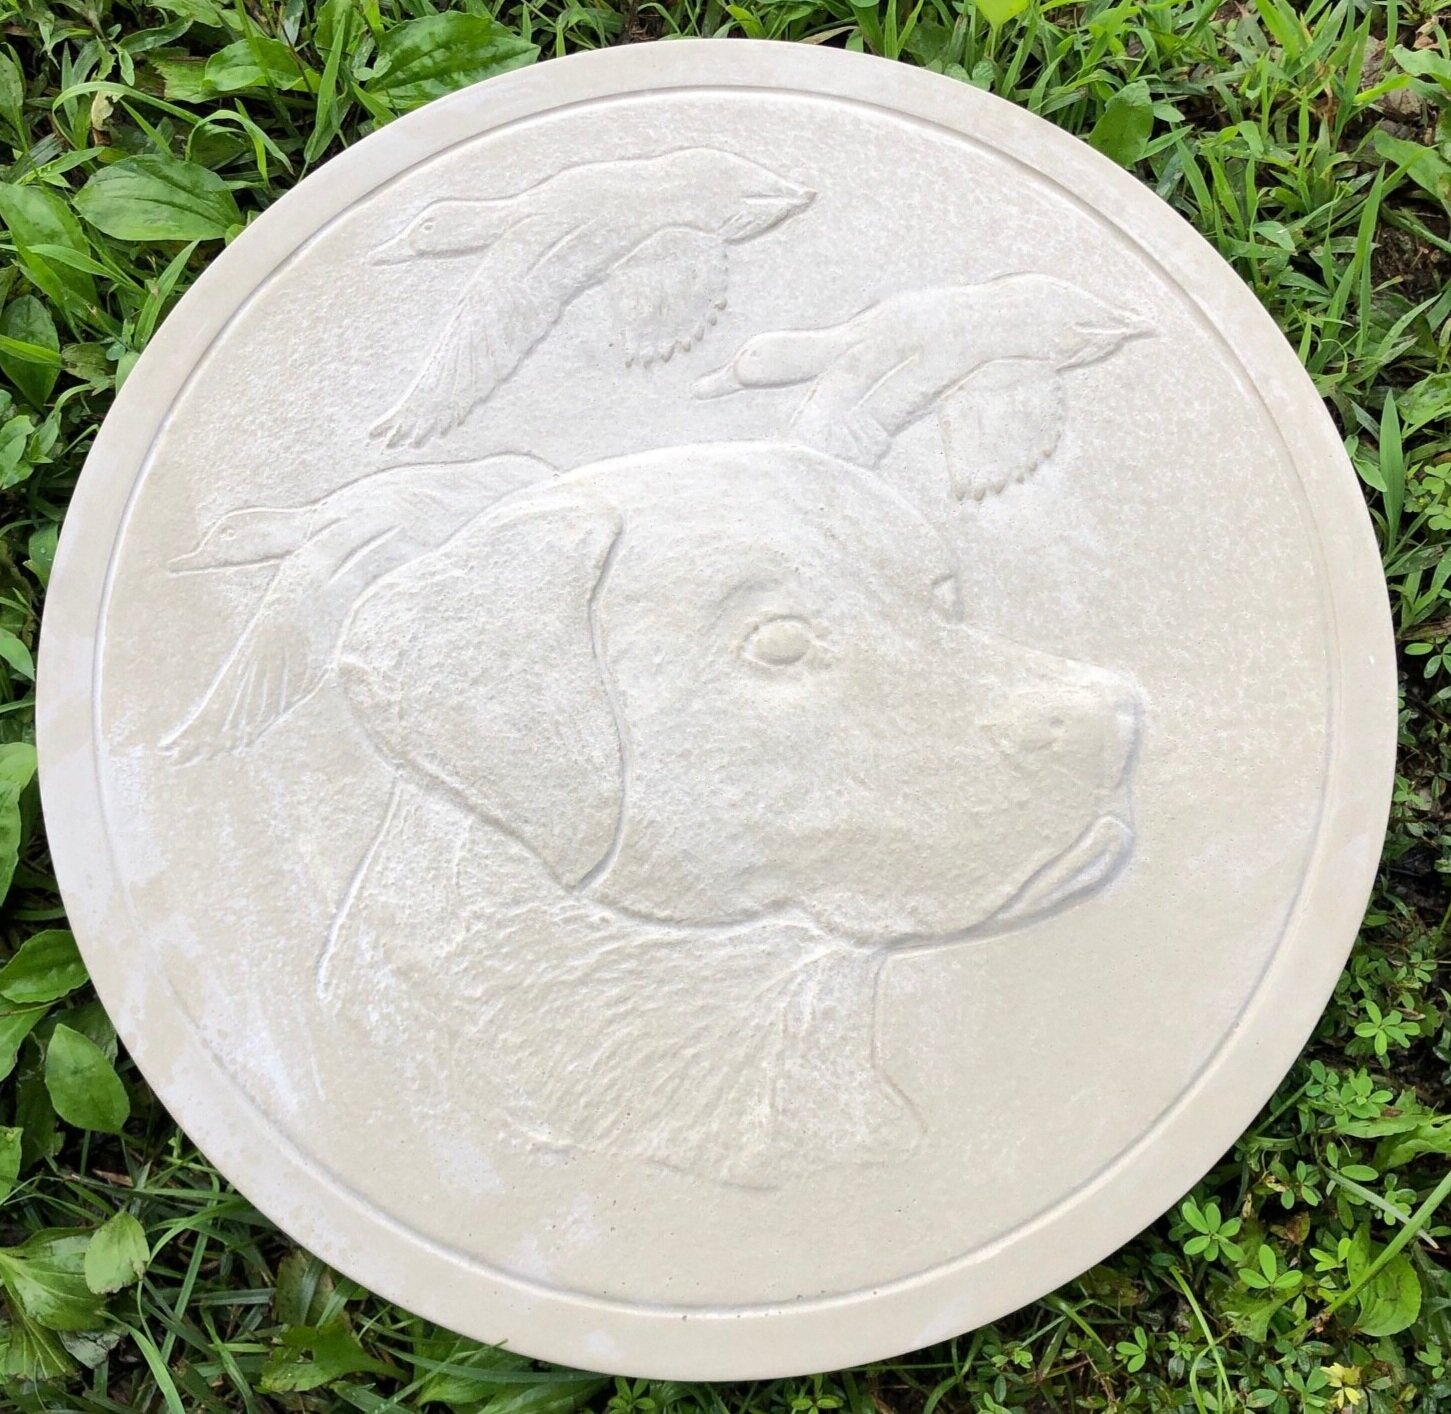 Pet Memorial Stepping Stone Plaster or Concrete Mold 7113 Moldcreations 